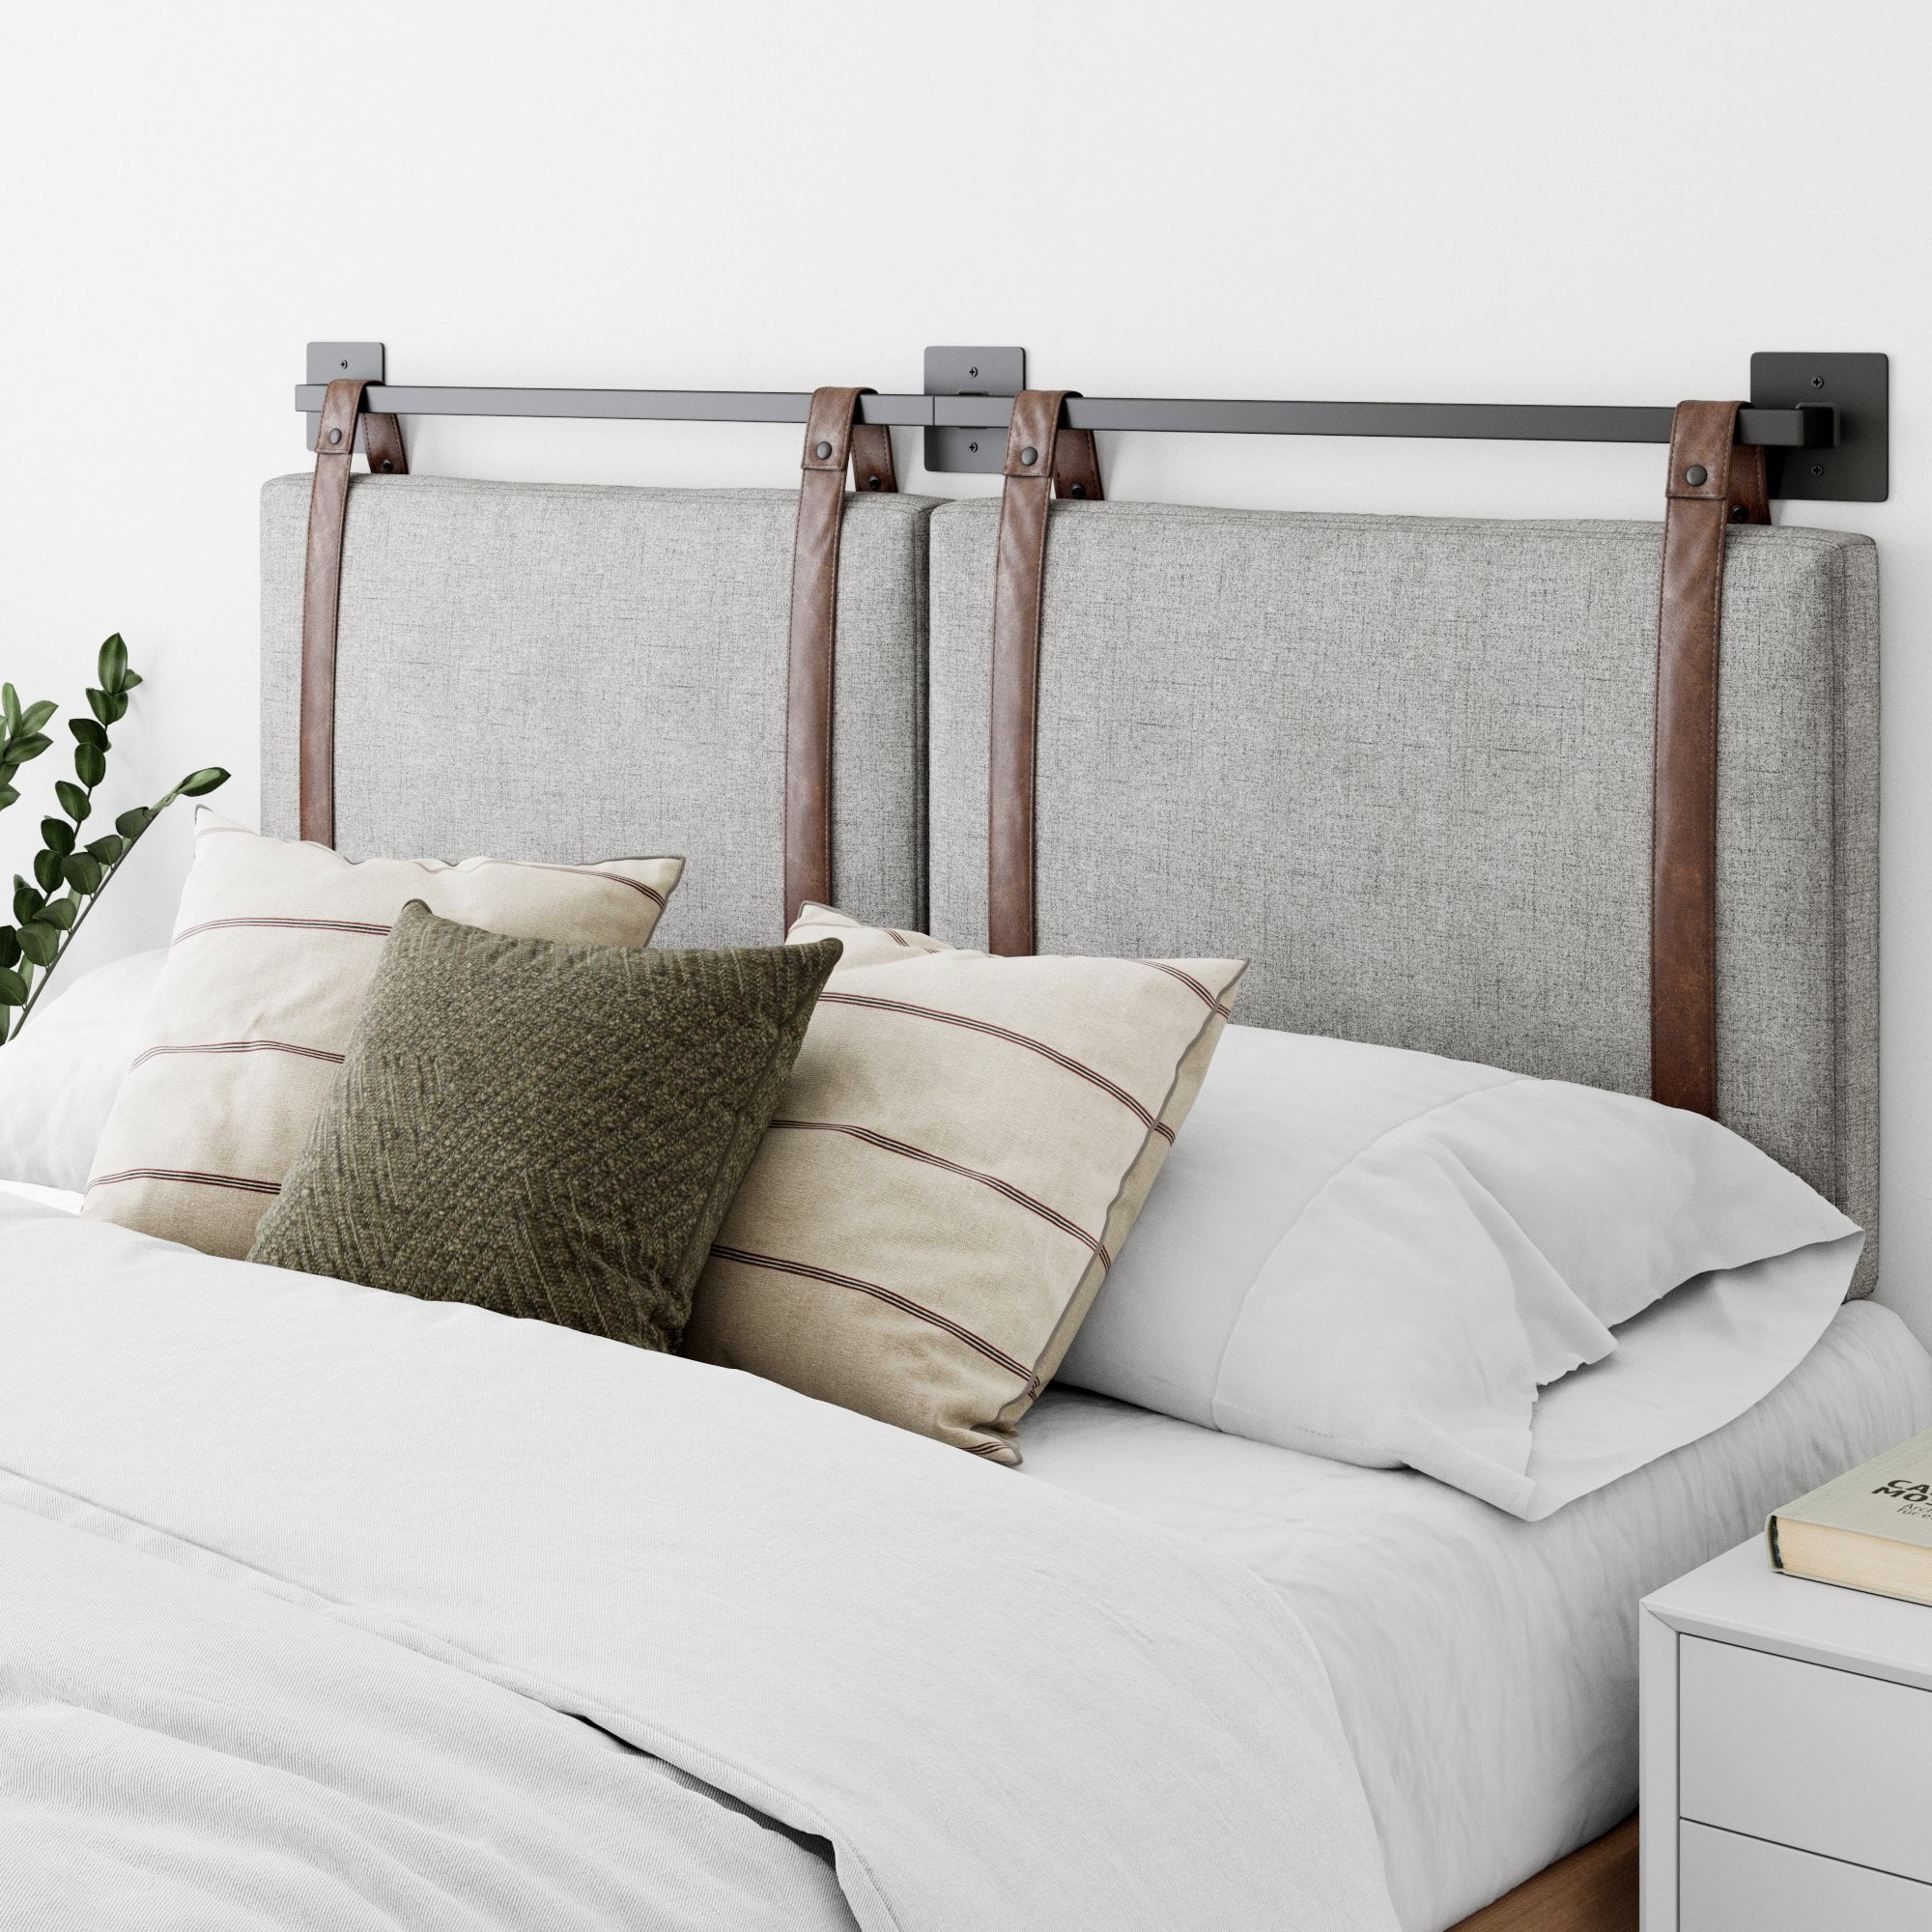 Nathan James Harlow King Wall Mount, Attaching A Padded Headboard To The Wall